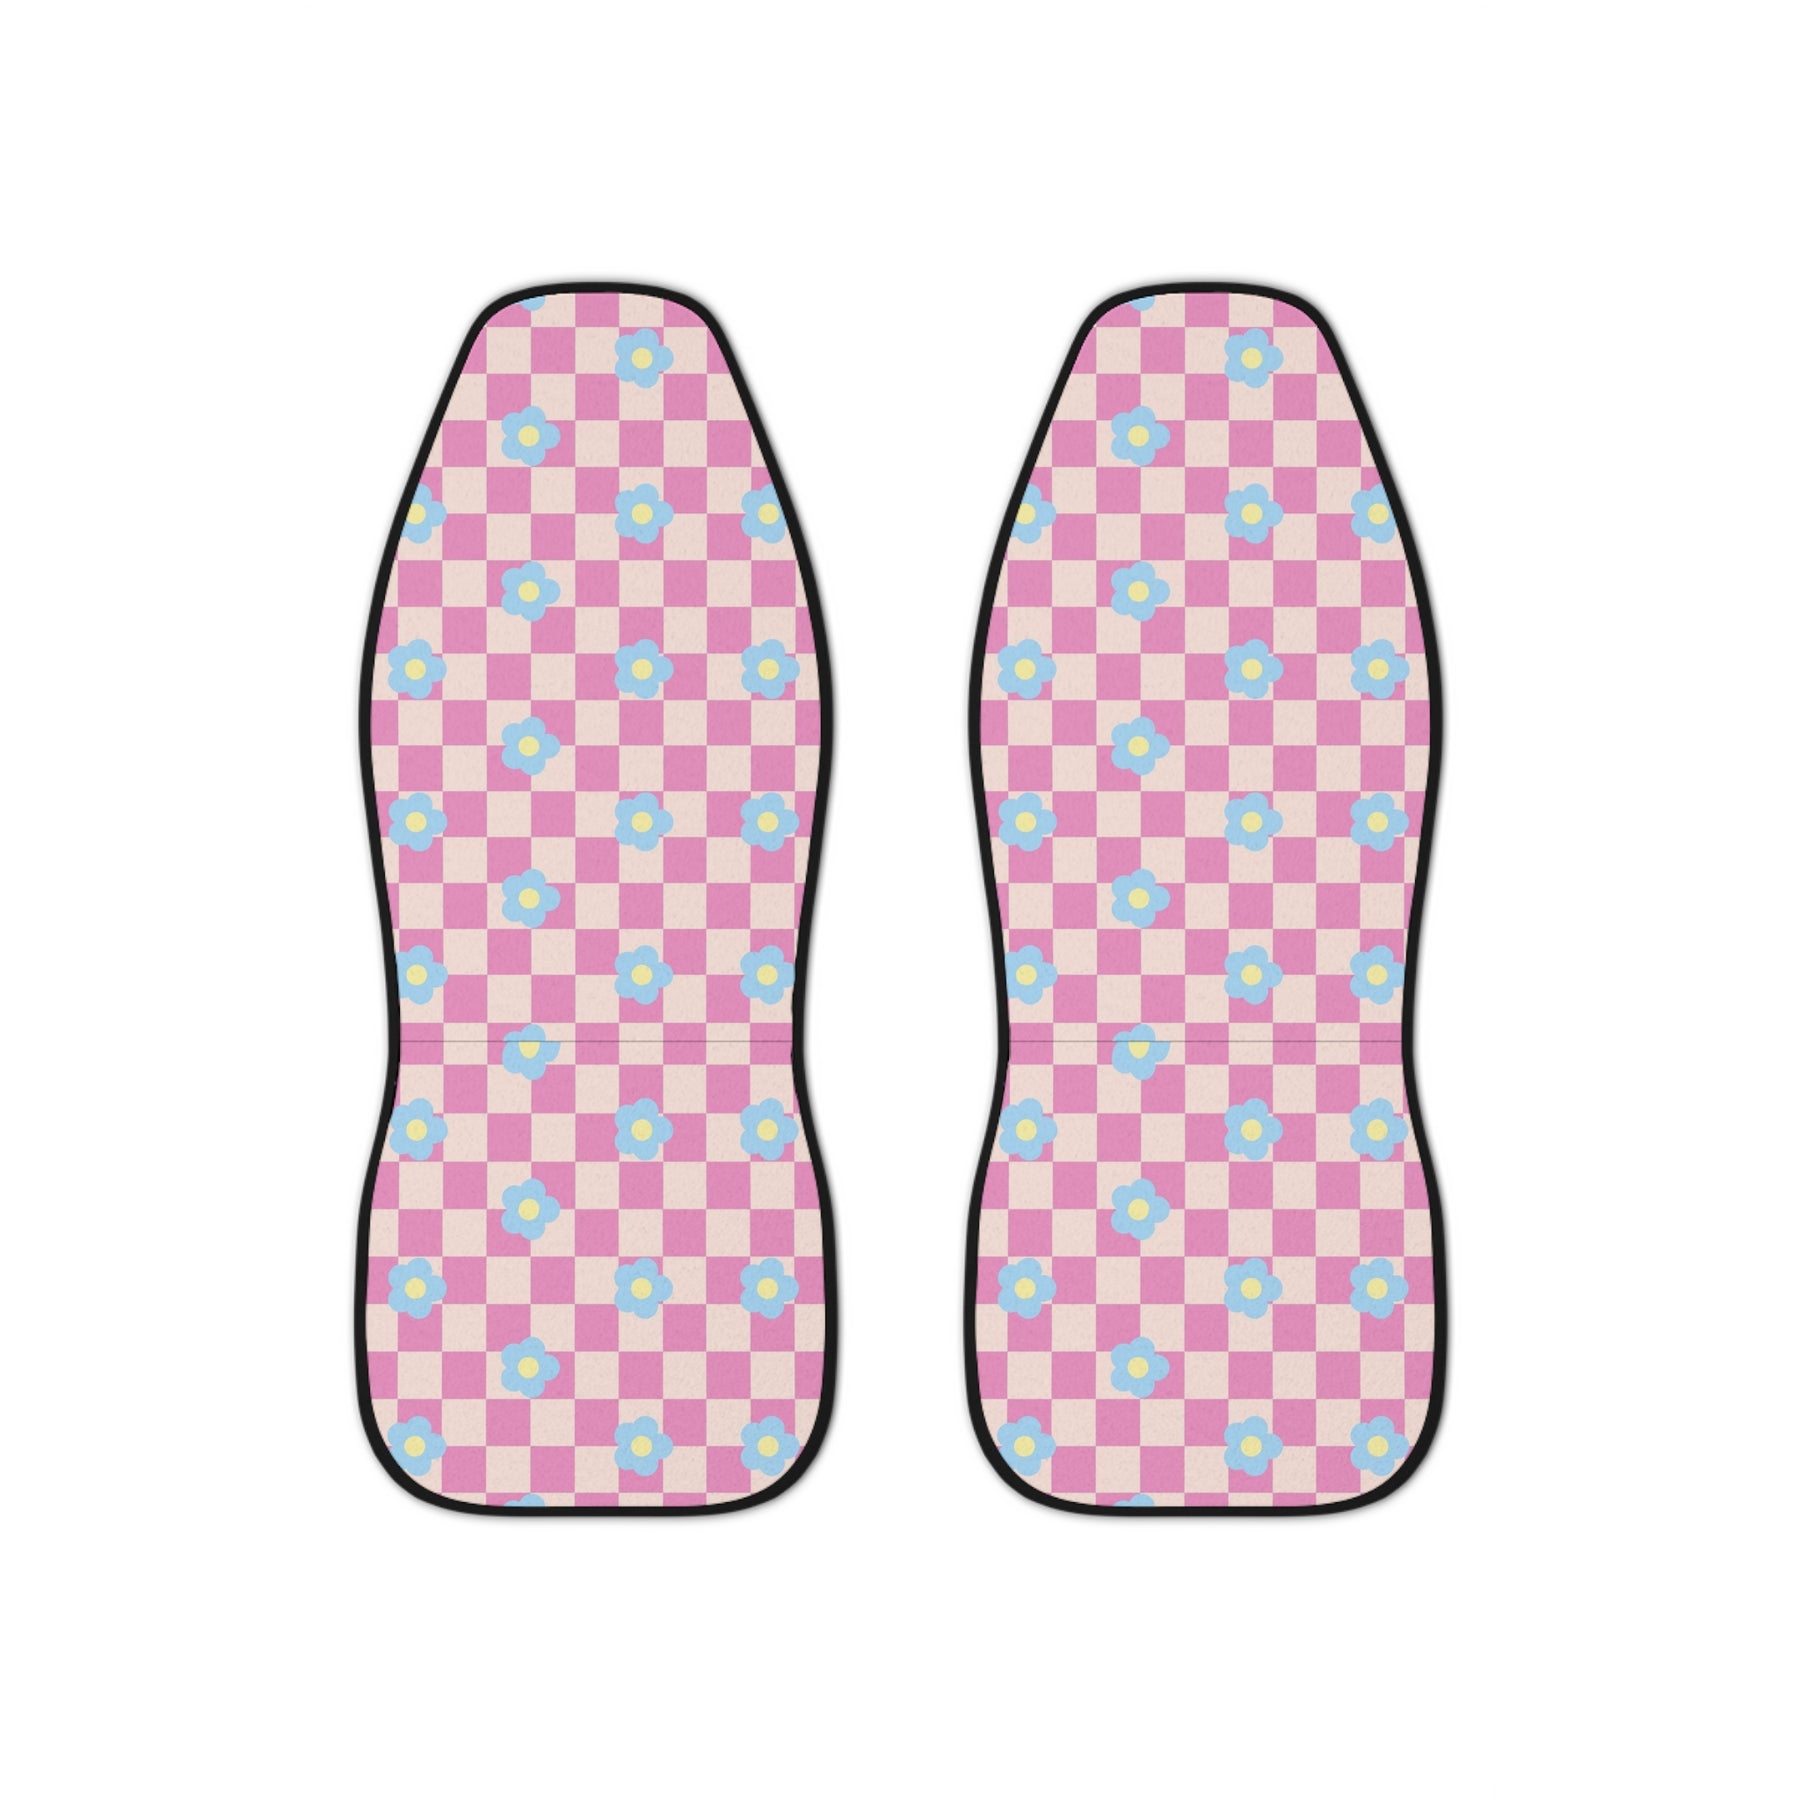 Pink Checkered Boho Car Seat Covers Set, Aesthetic y2k flower Car Seat Cover, Good Vibes Groovy cute car Accessories,Cute y2k car decoration